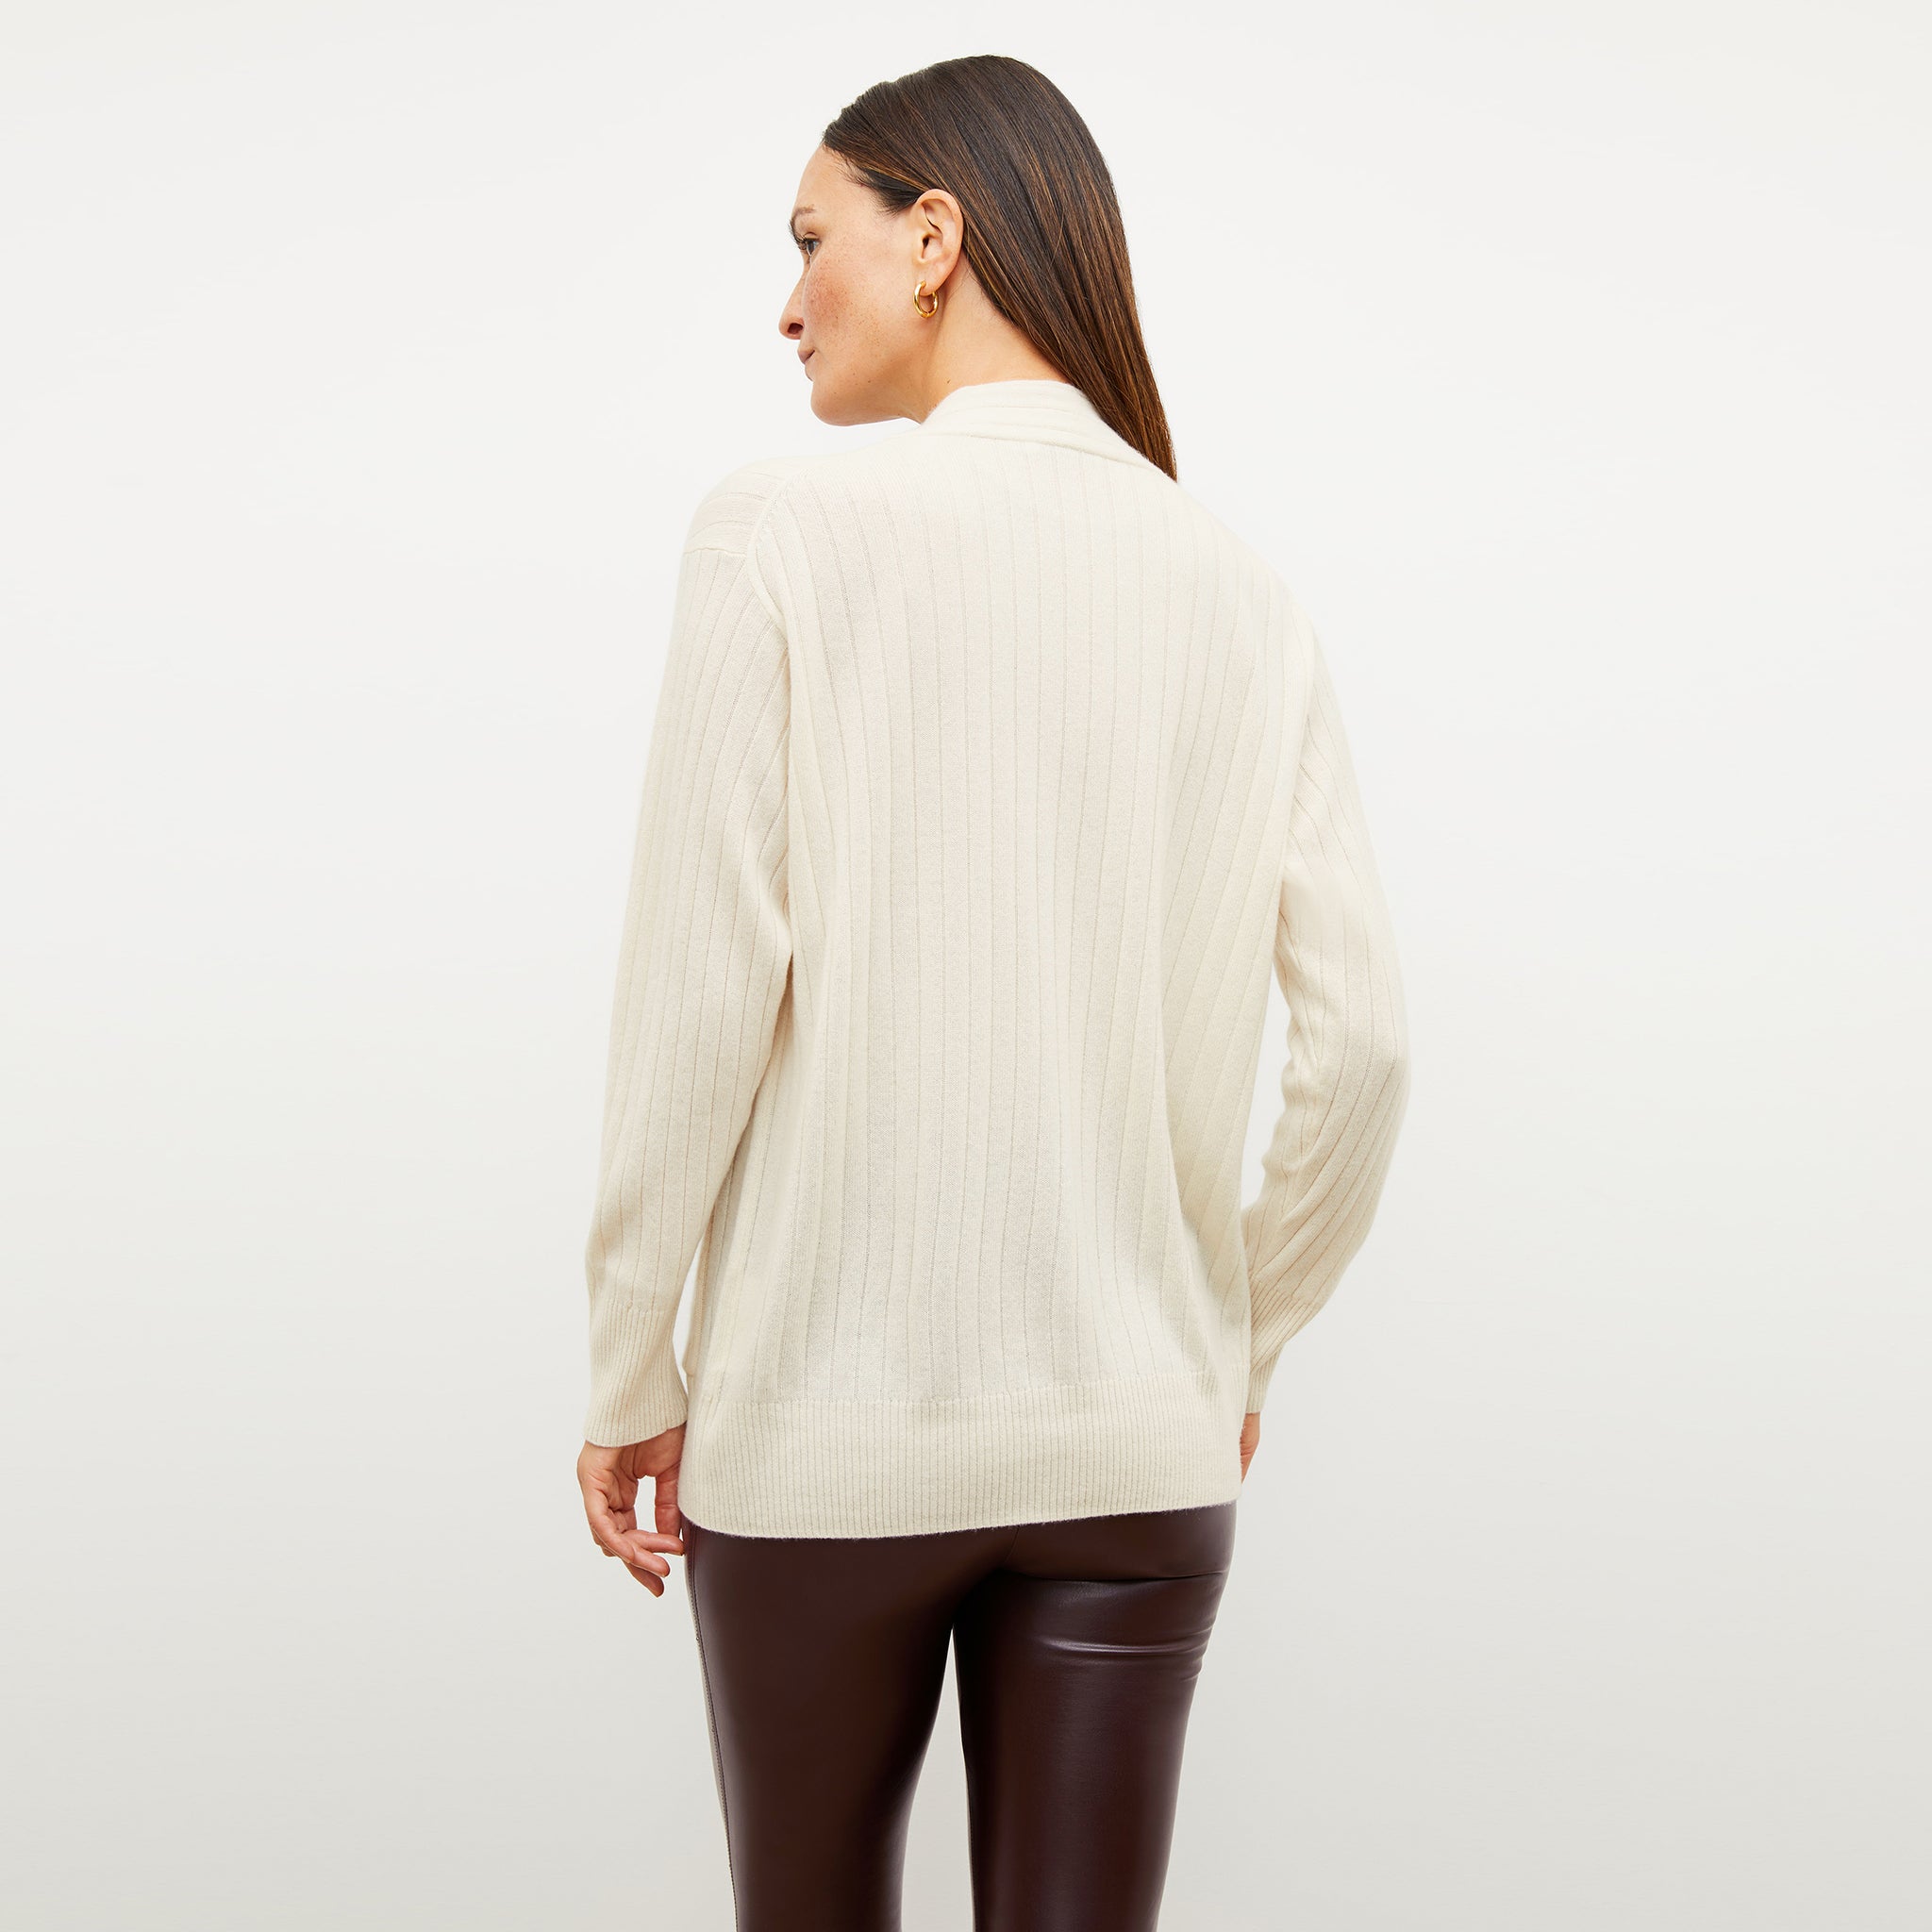 Back image of a woman wearing the caro sweater in light cream